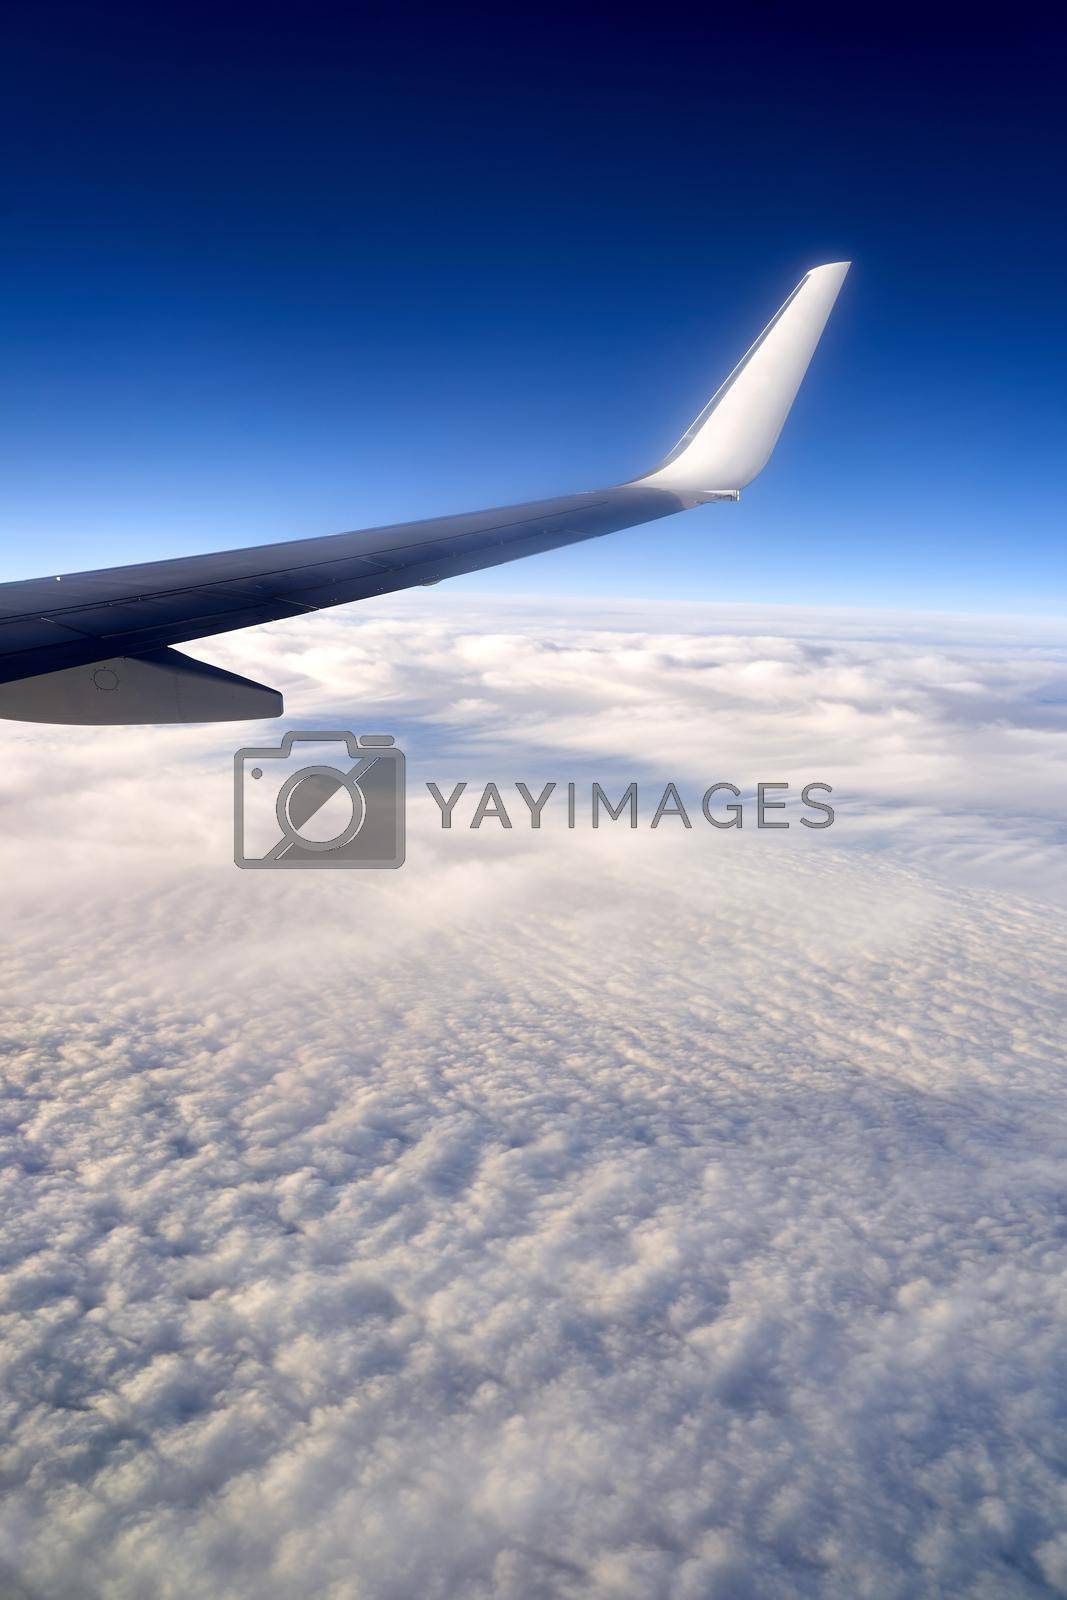 View of airplane wing on blue sky background. Plane over clouds in the sky.